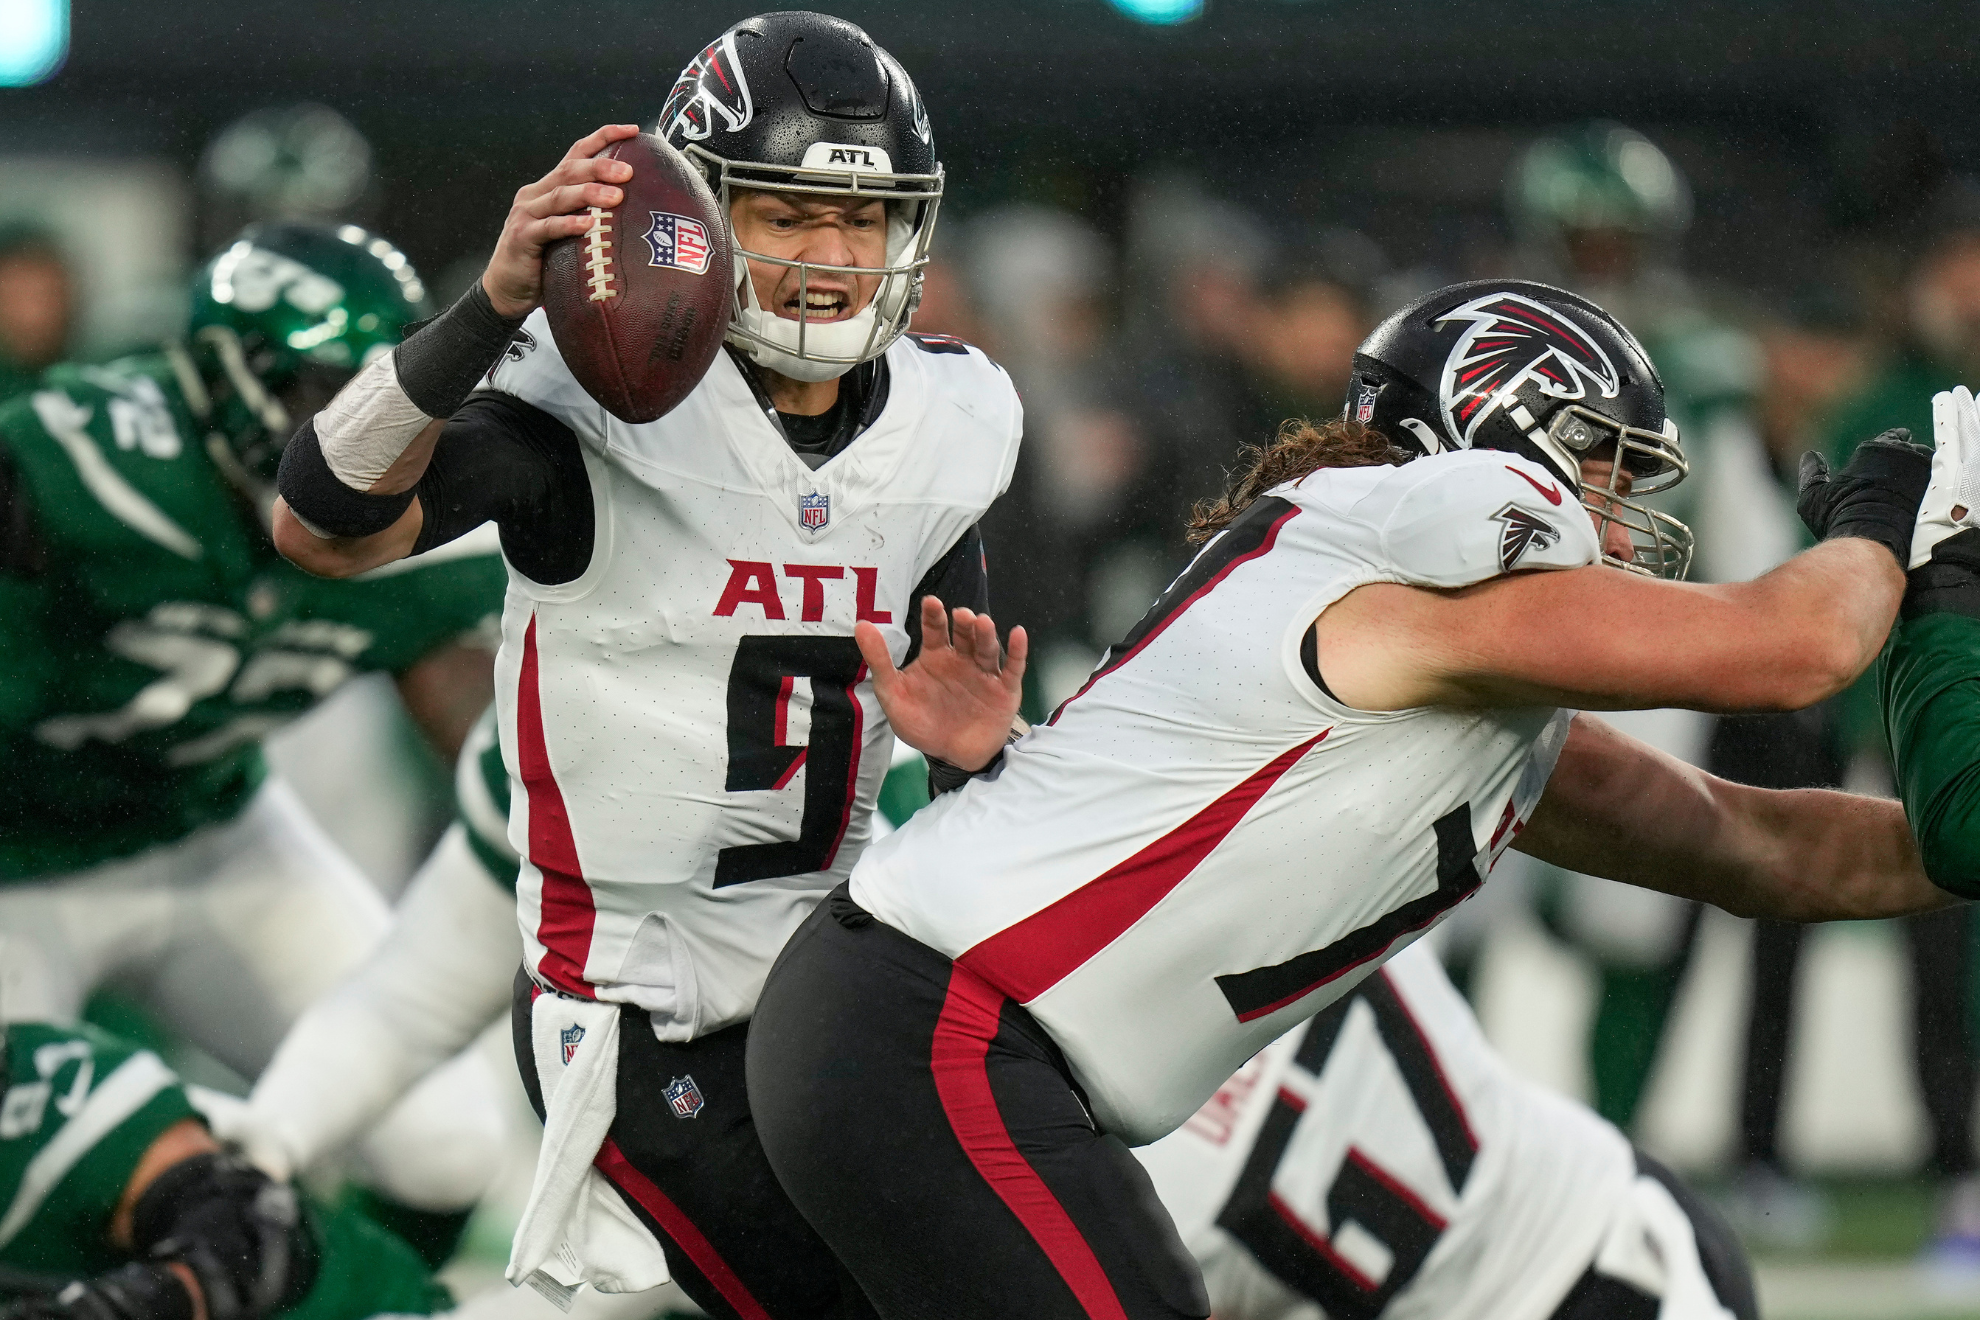 Desmond Ridder completed only 12 passes but led Atlanta to a vital win.